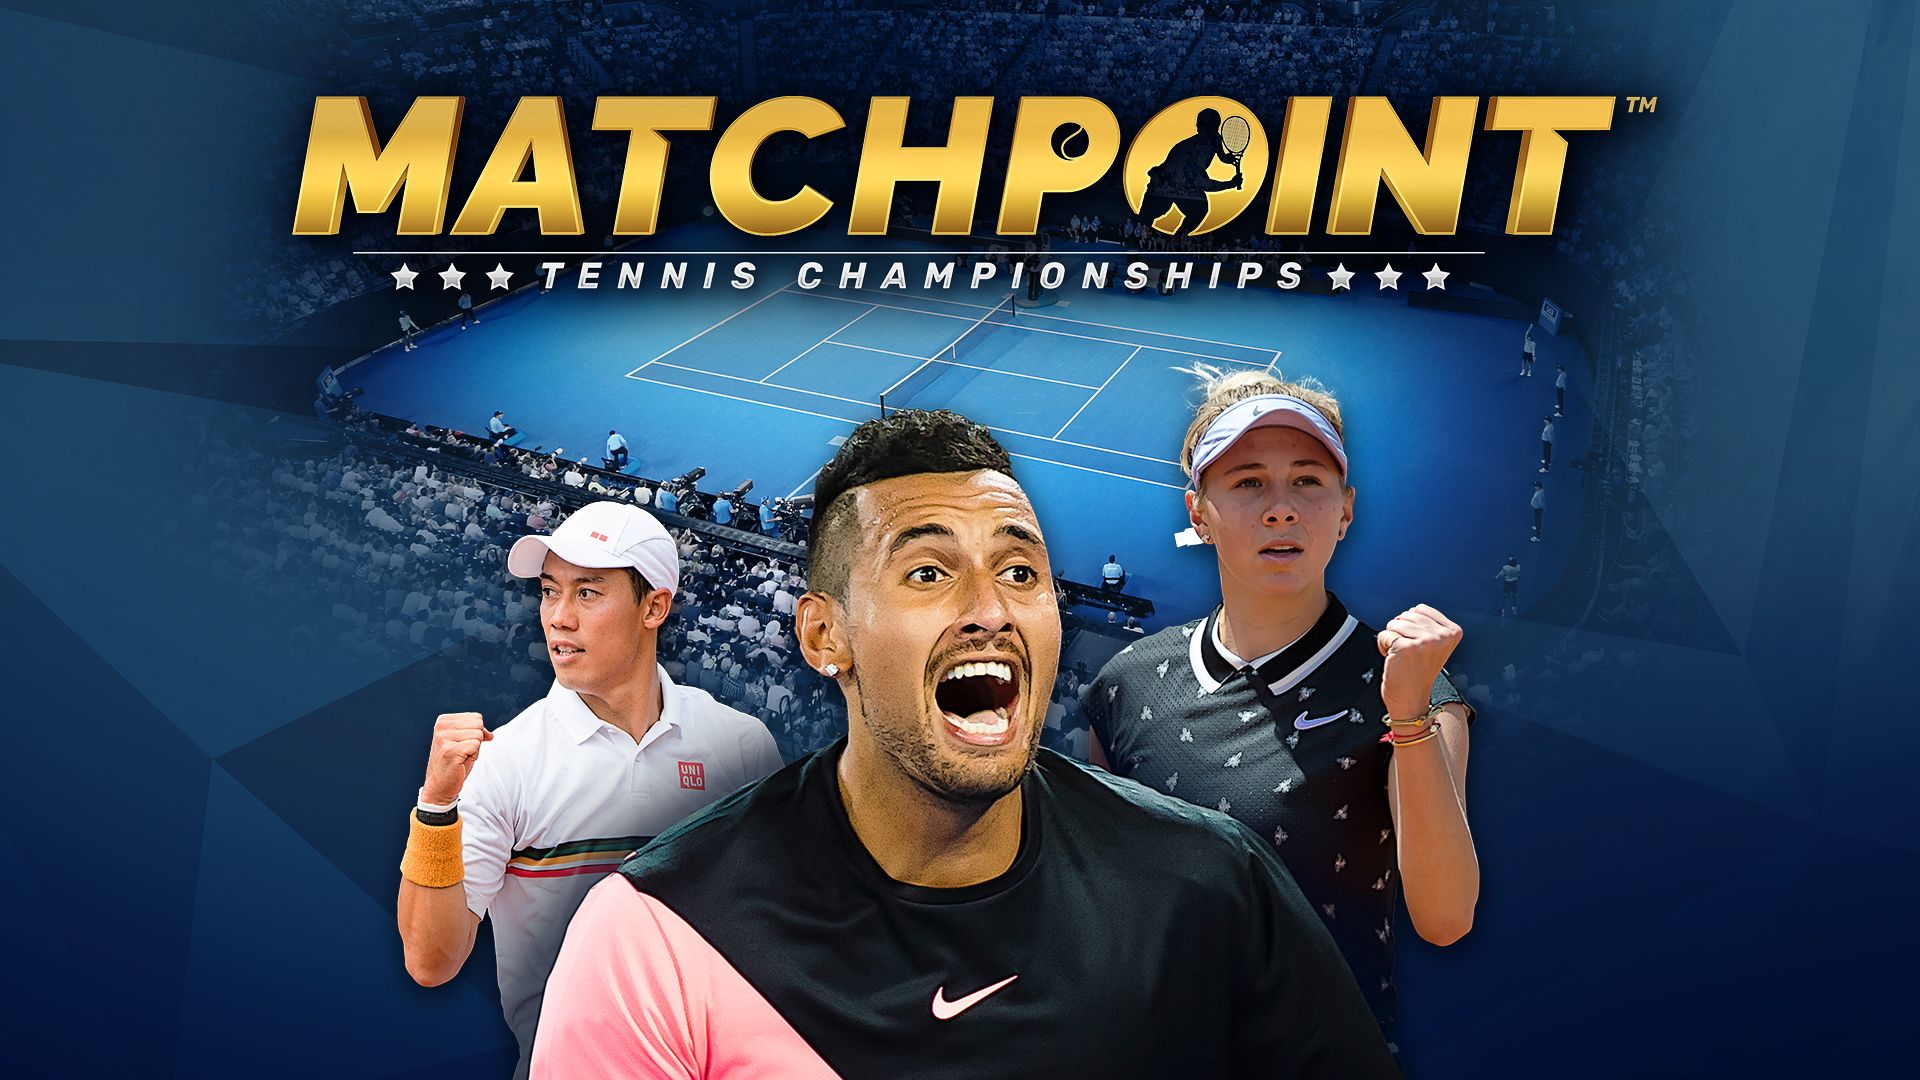 Matchpoint - Tennis Championships Hero Image